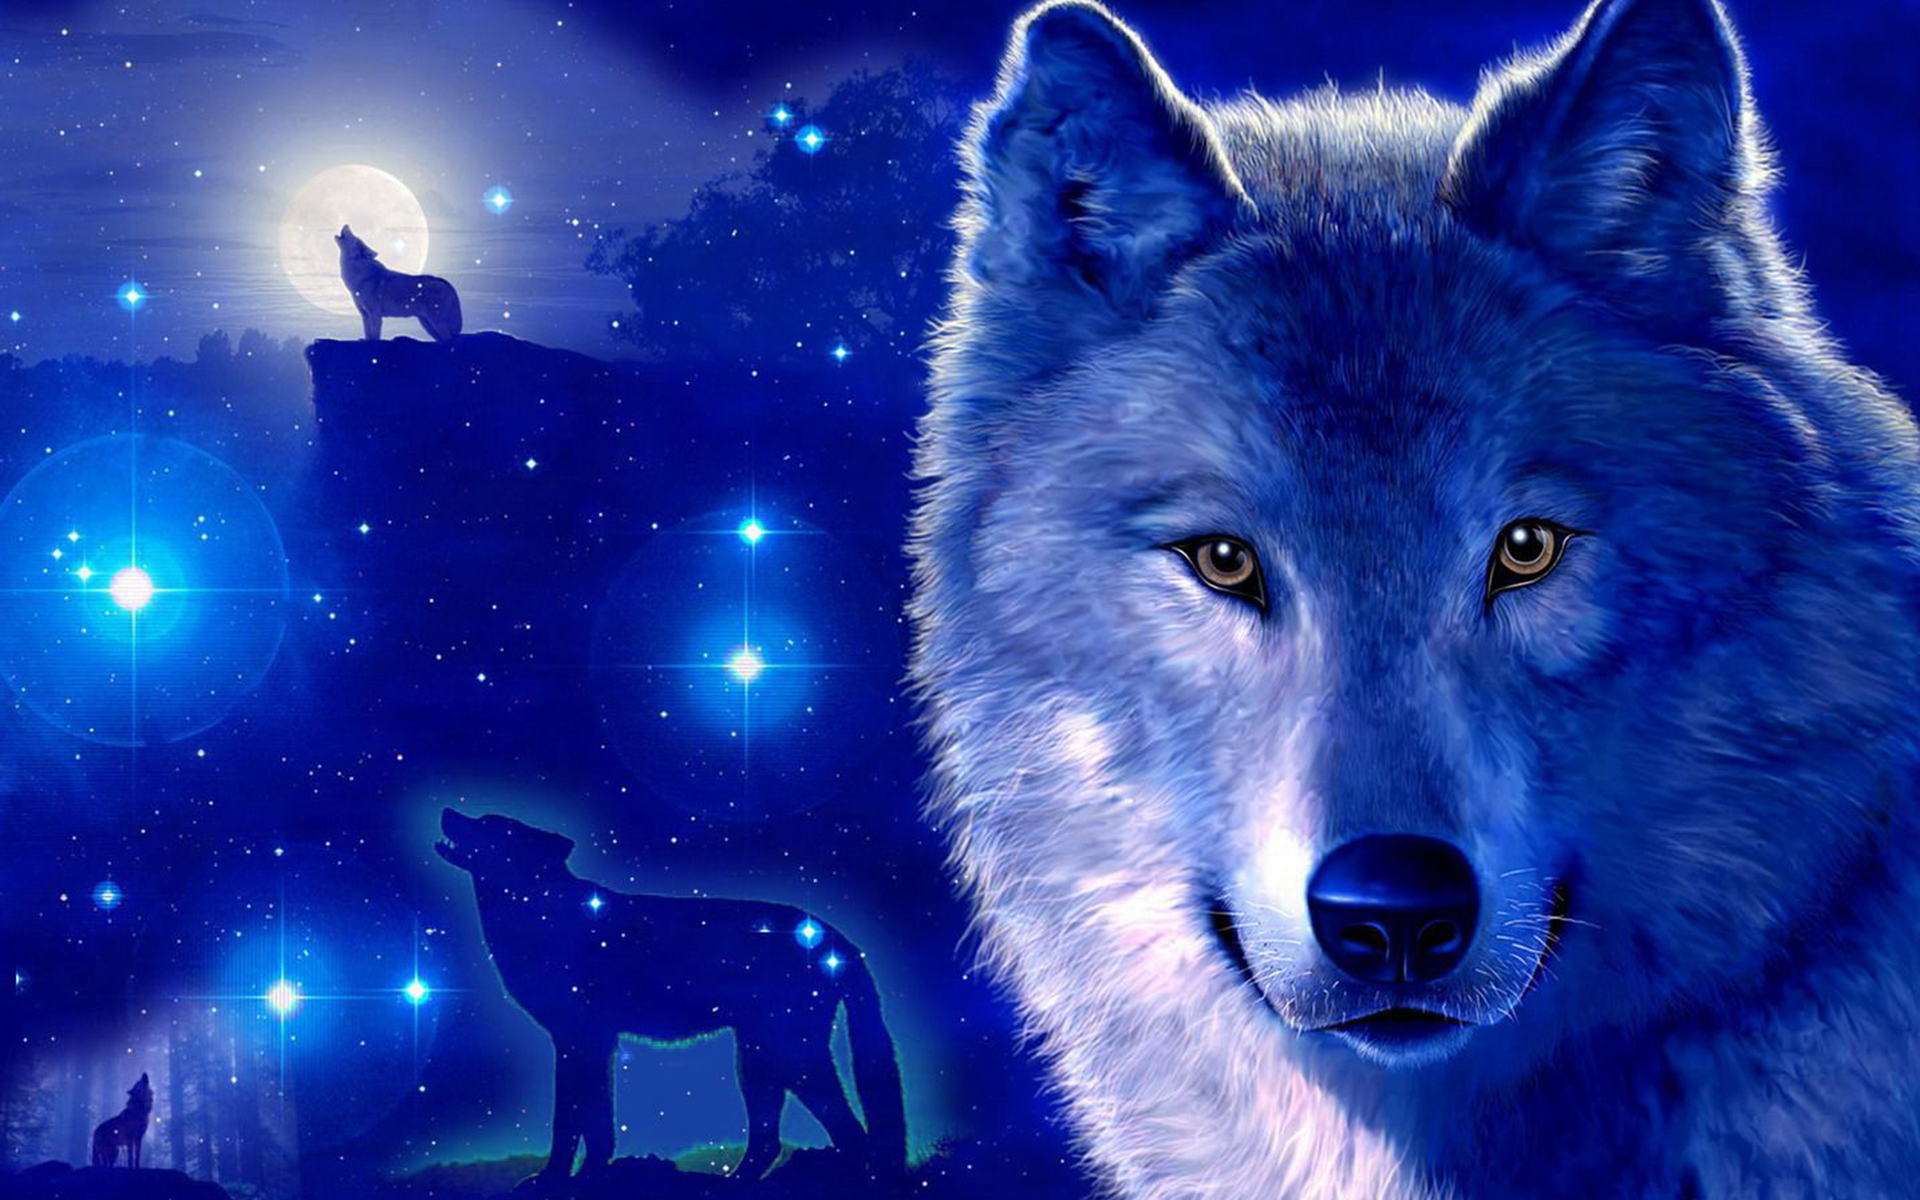 Beautiful Painting of Timber Wolf 2K wallpaper download